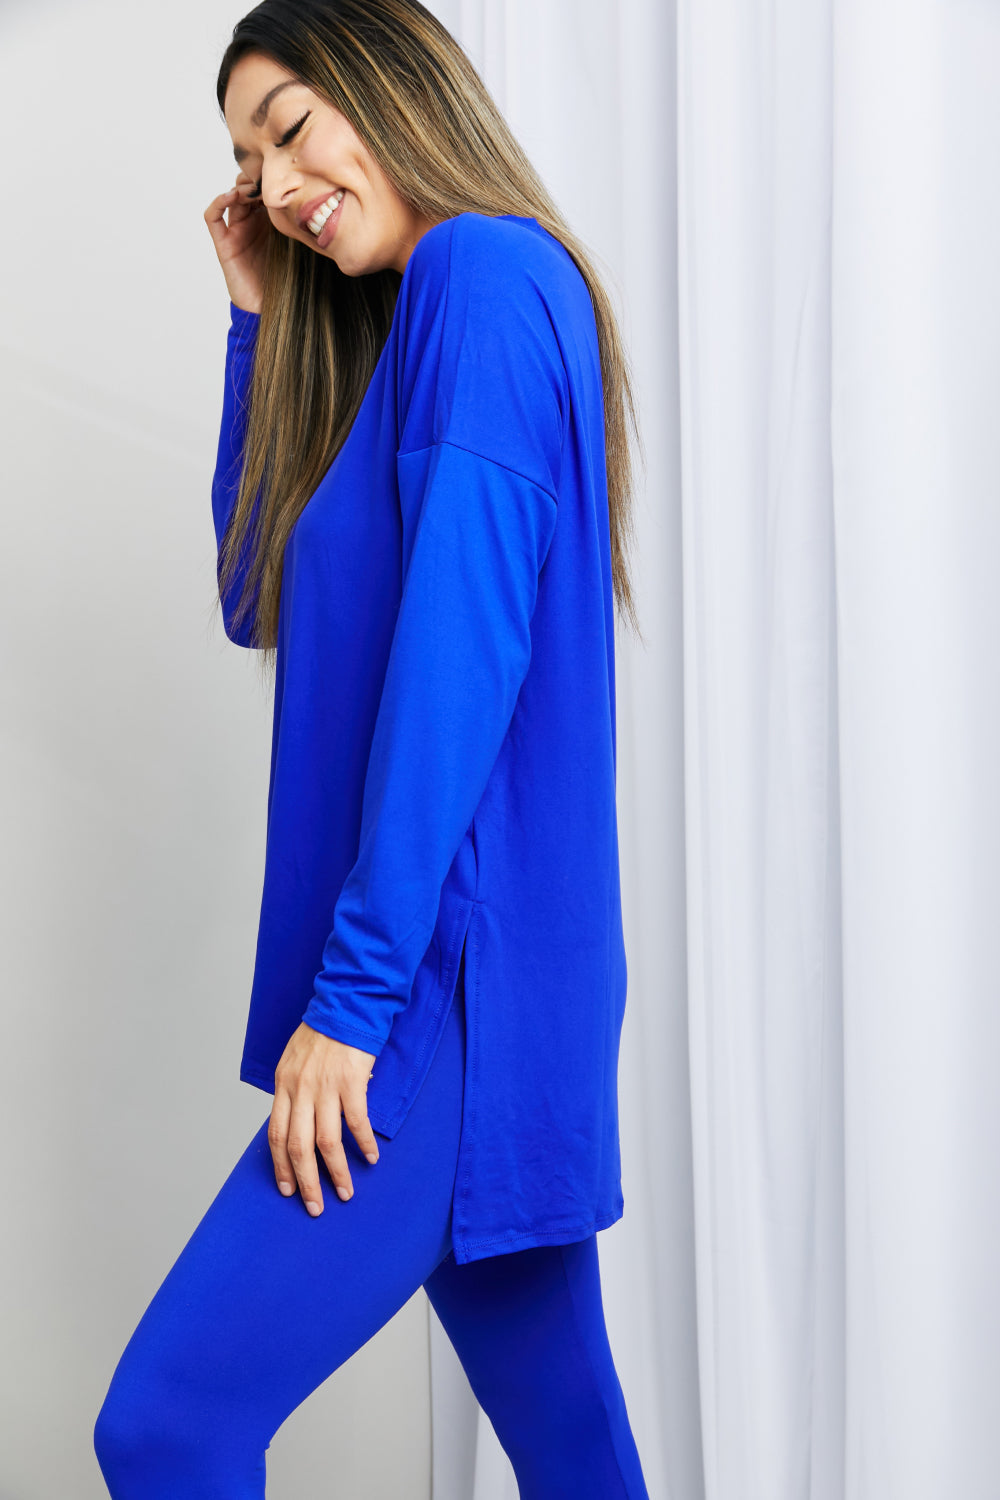 BRIGHT BLUE Zenana Ready to Relax Full Size Brushed Microfiber Loungewear Outfit Set in Bright Blue - Ships from The US - women's top & pants set at TFC&H Co.